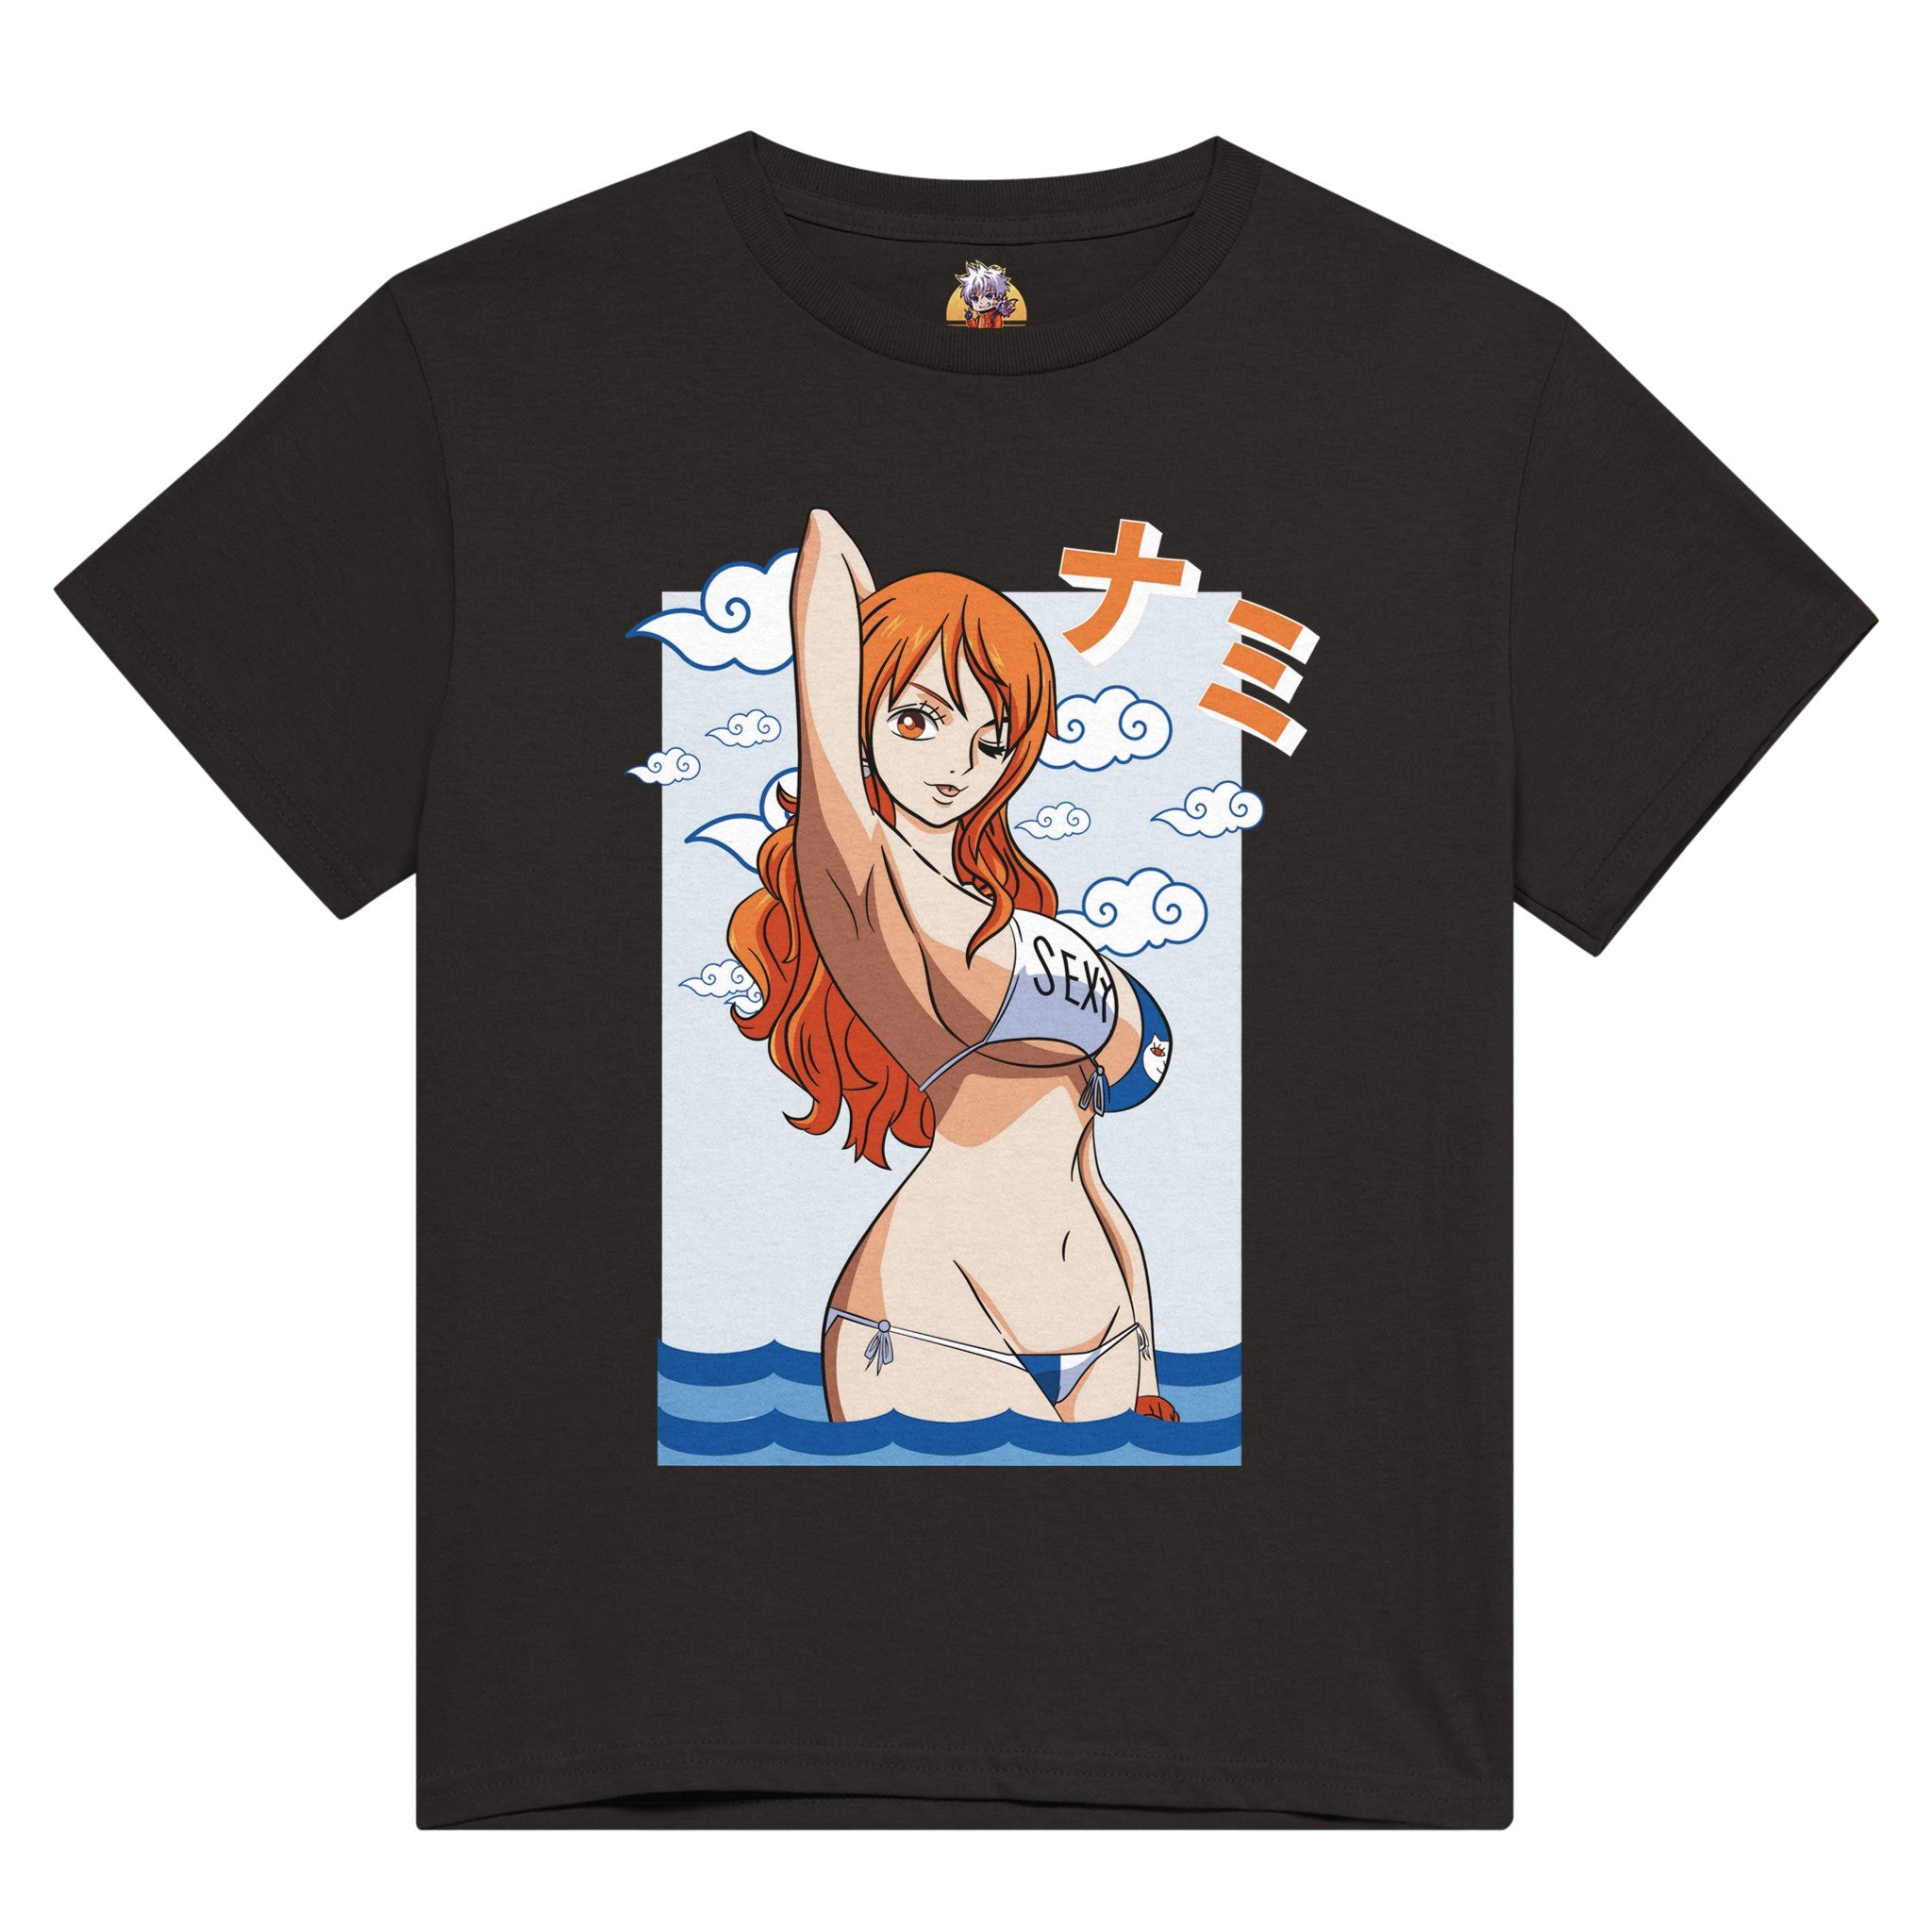 shop and buy one piece anime clothing nami t-shirt